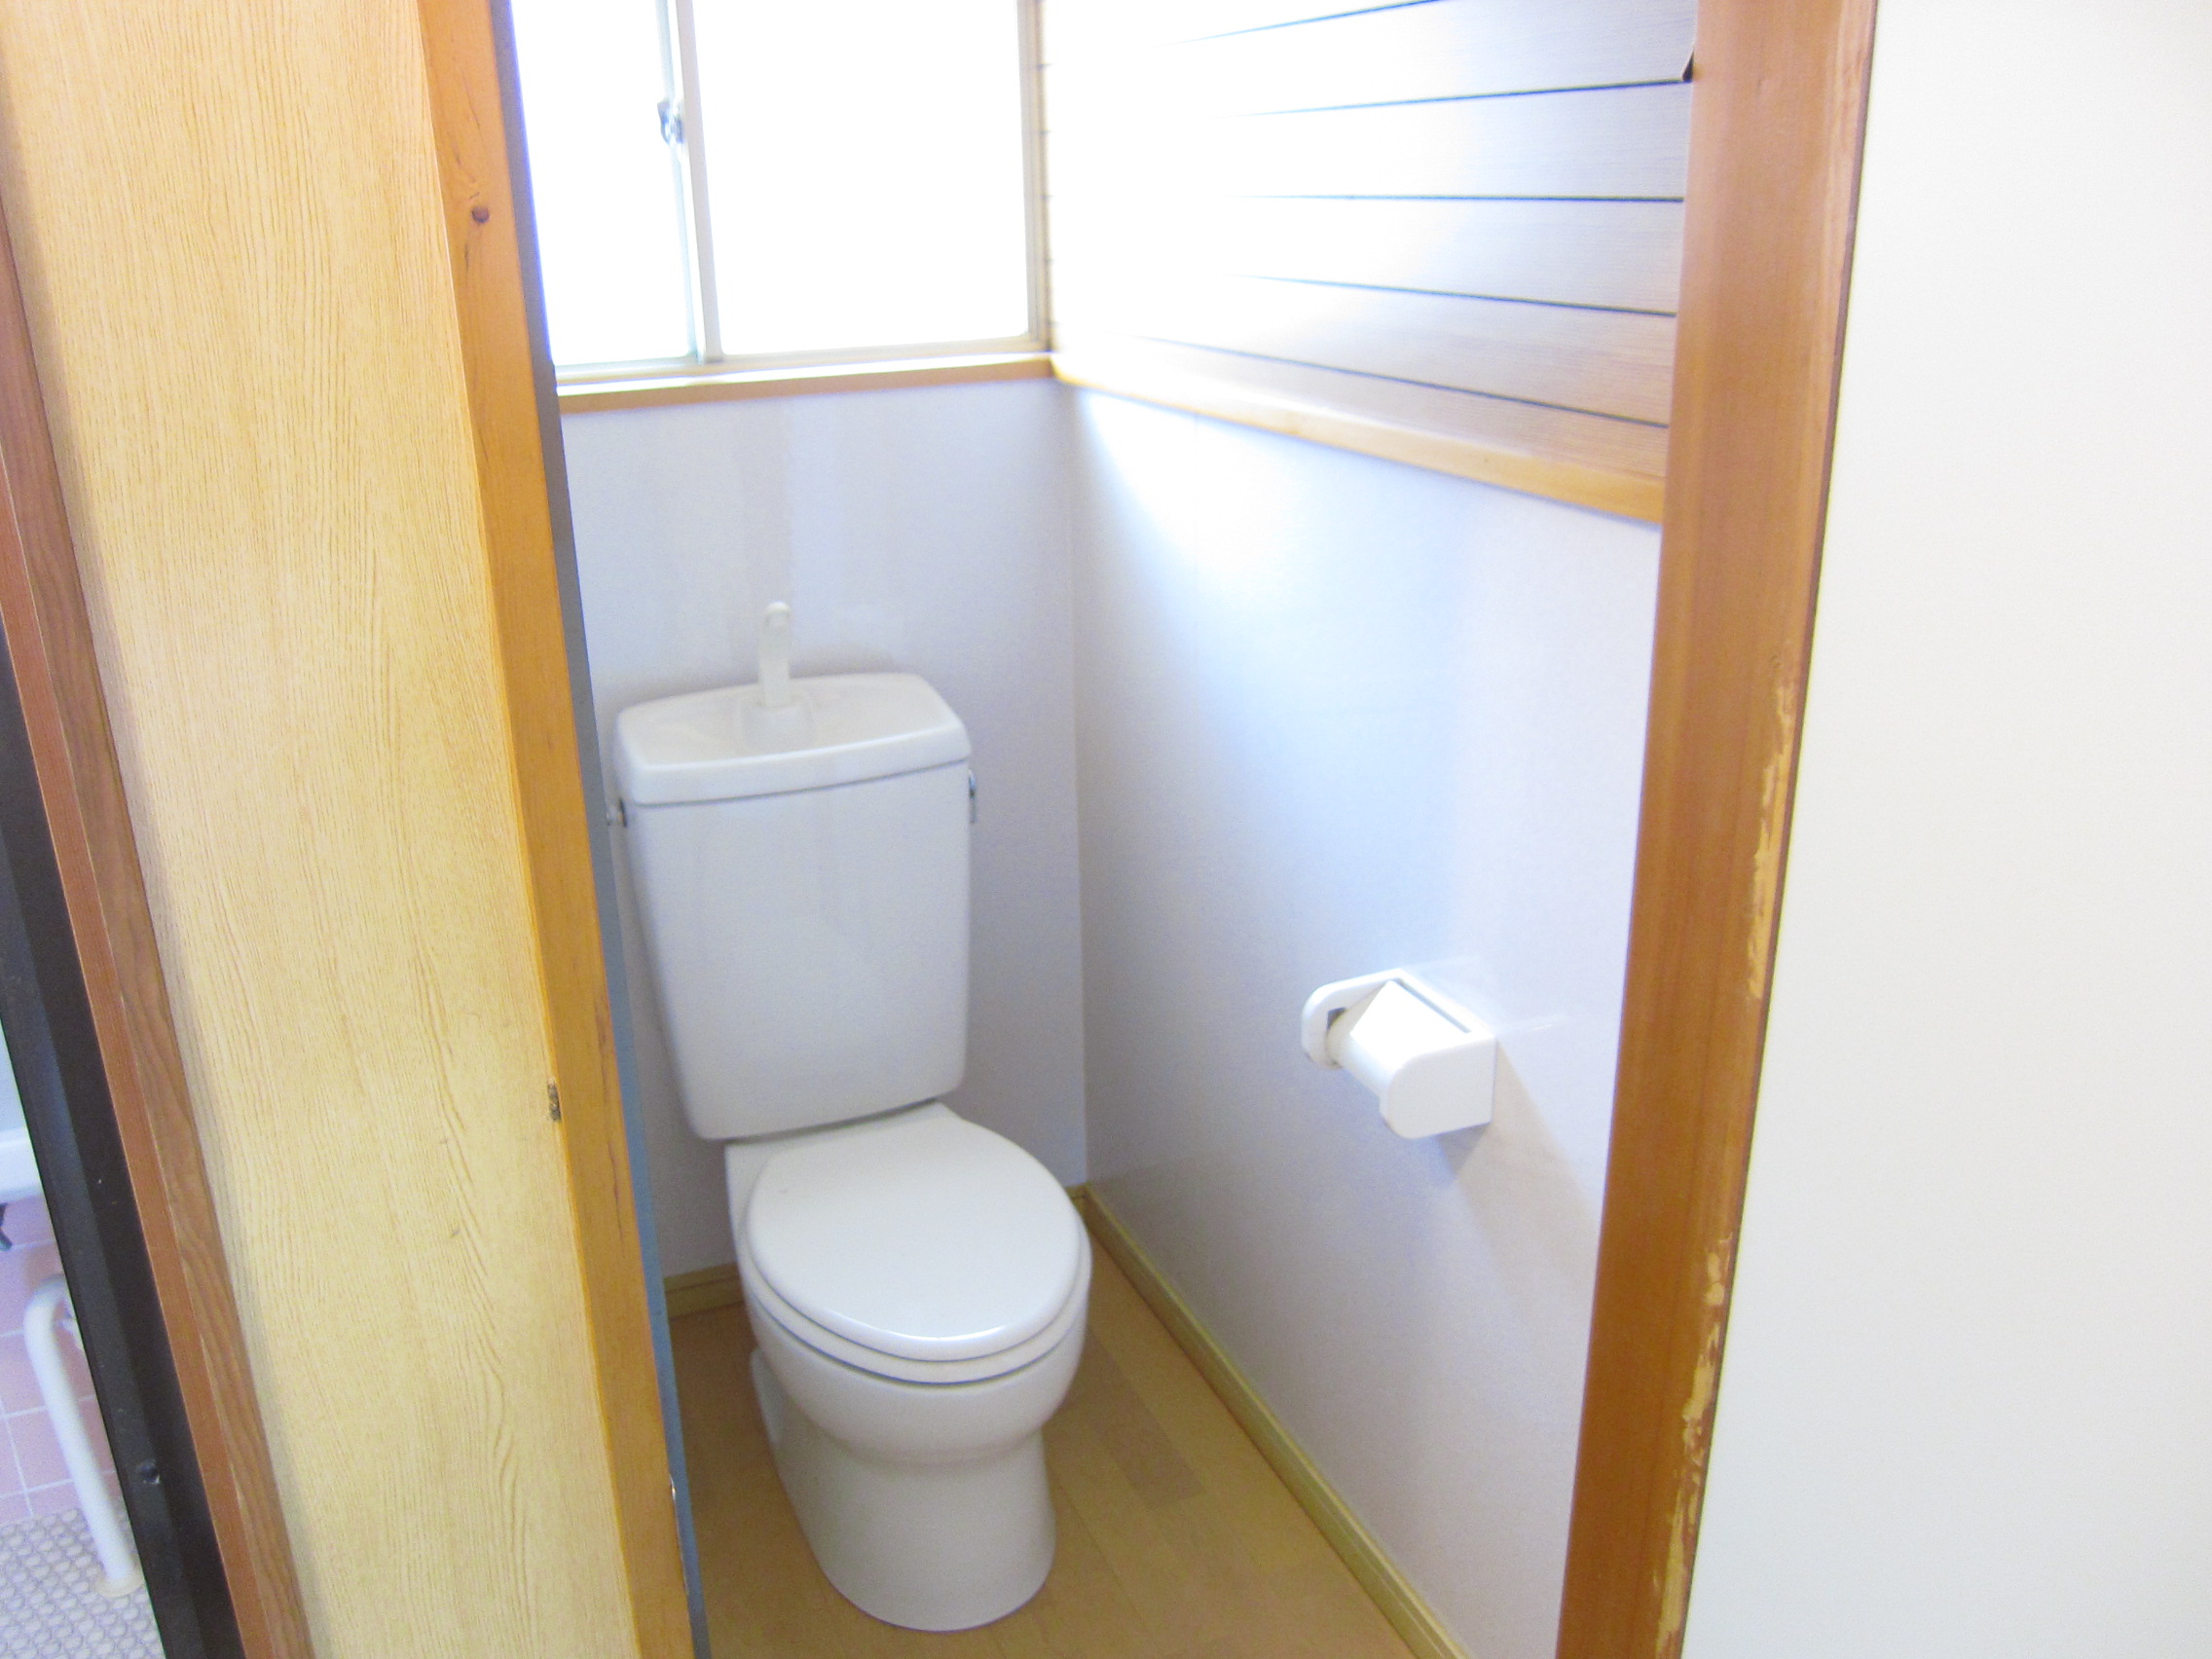 Toilet. It has secured sufficient space.